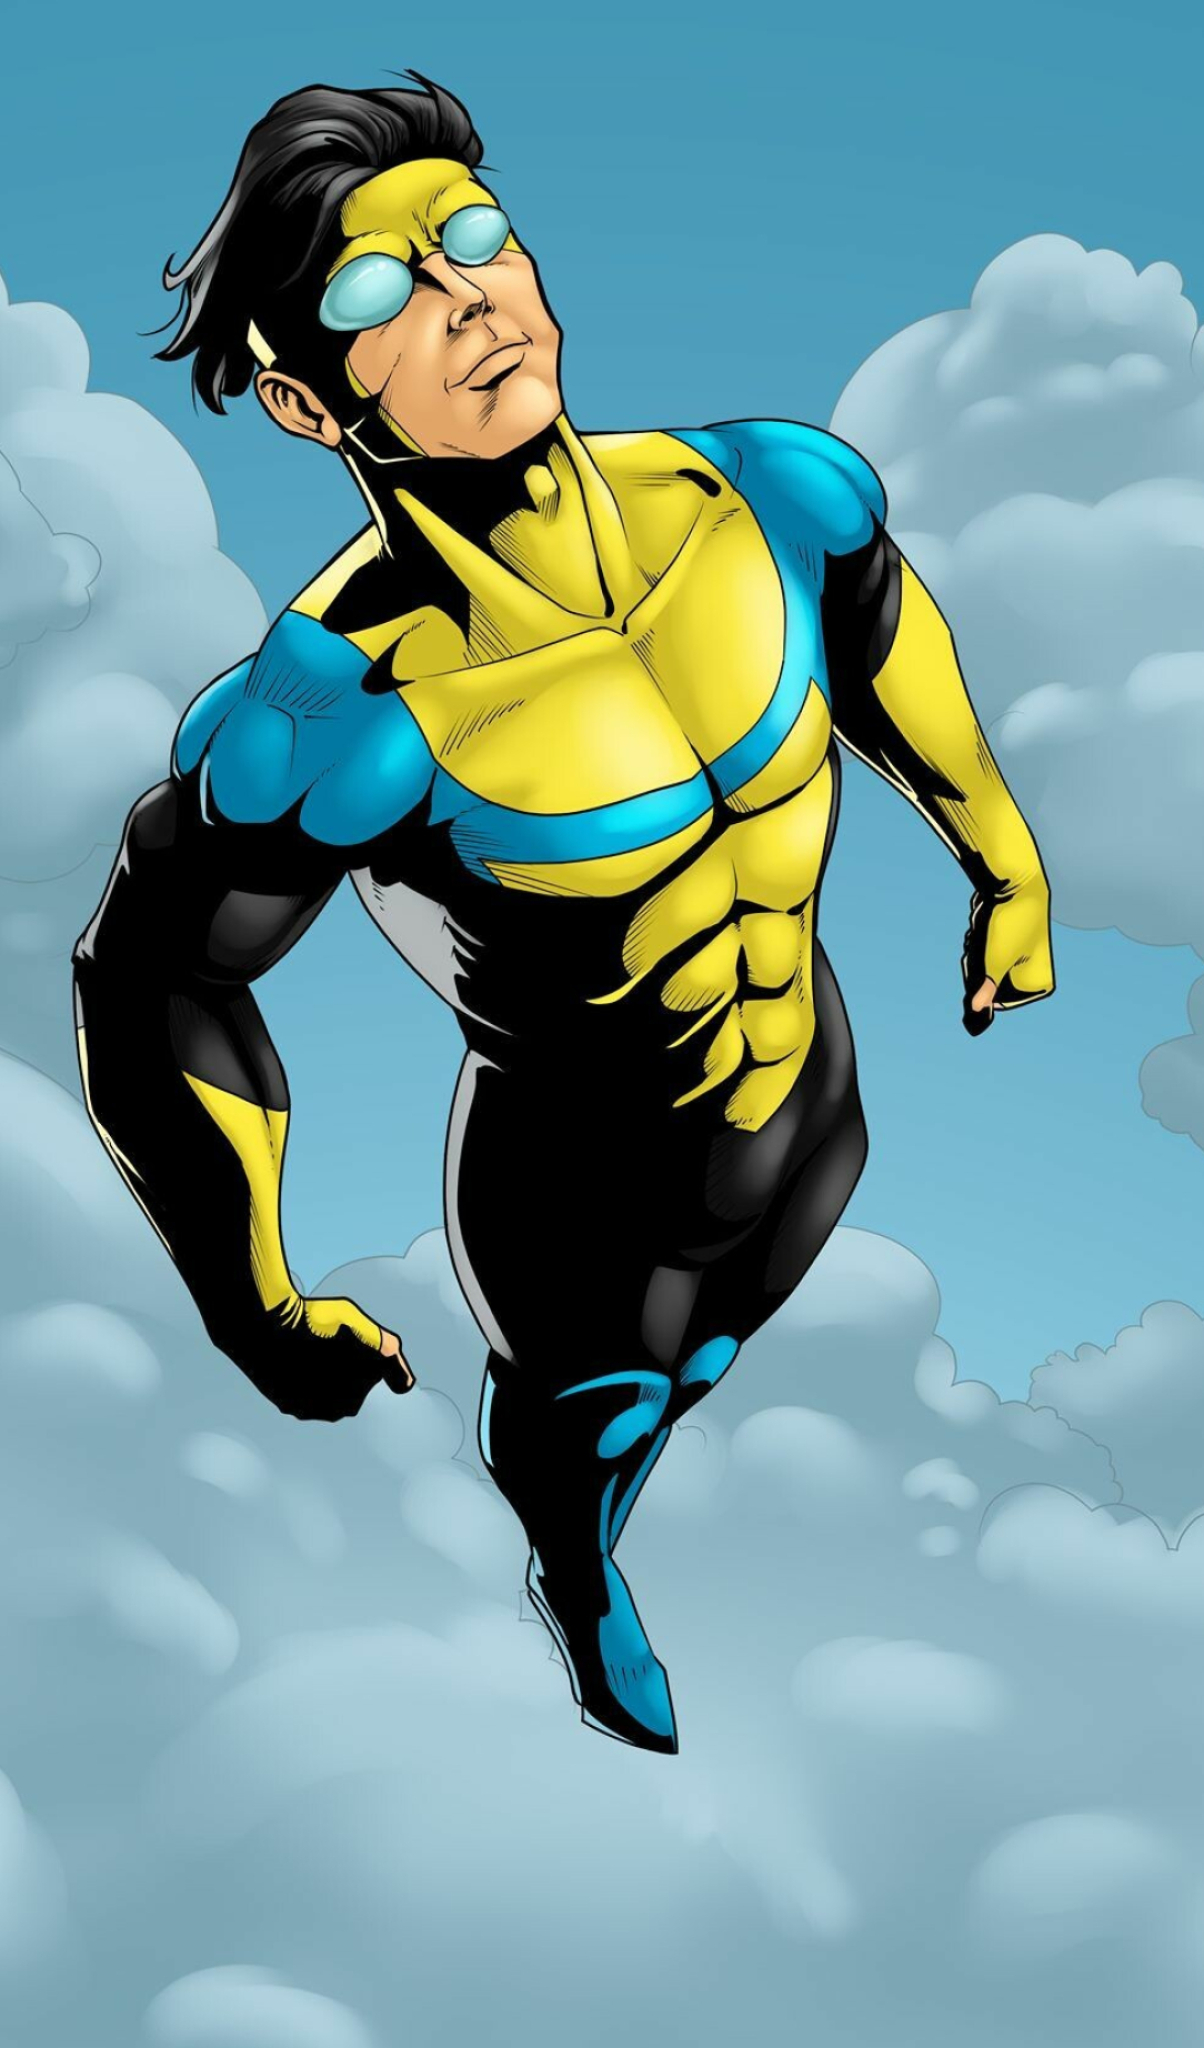 Invincible, Action-packed animation, Superhero origins, Battle for justice, 1210x2050 HD Handy